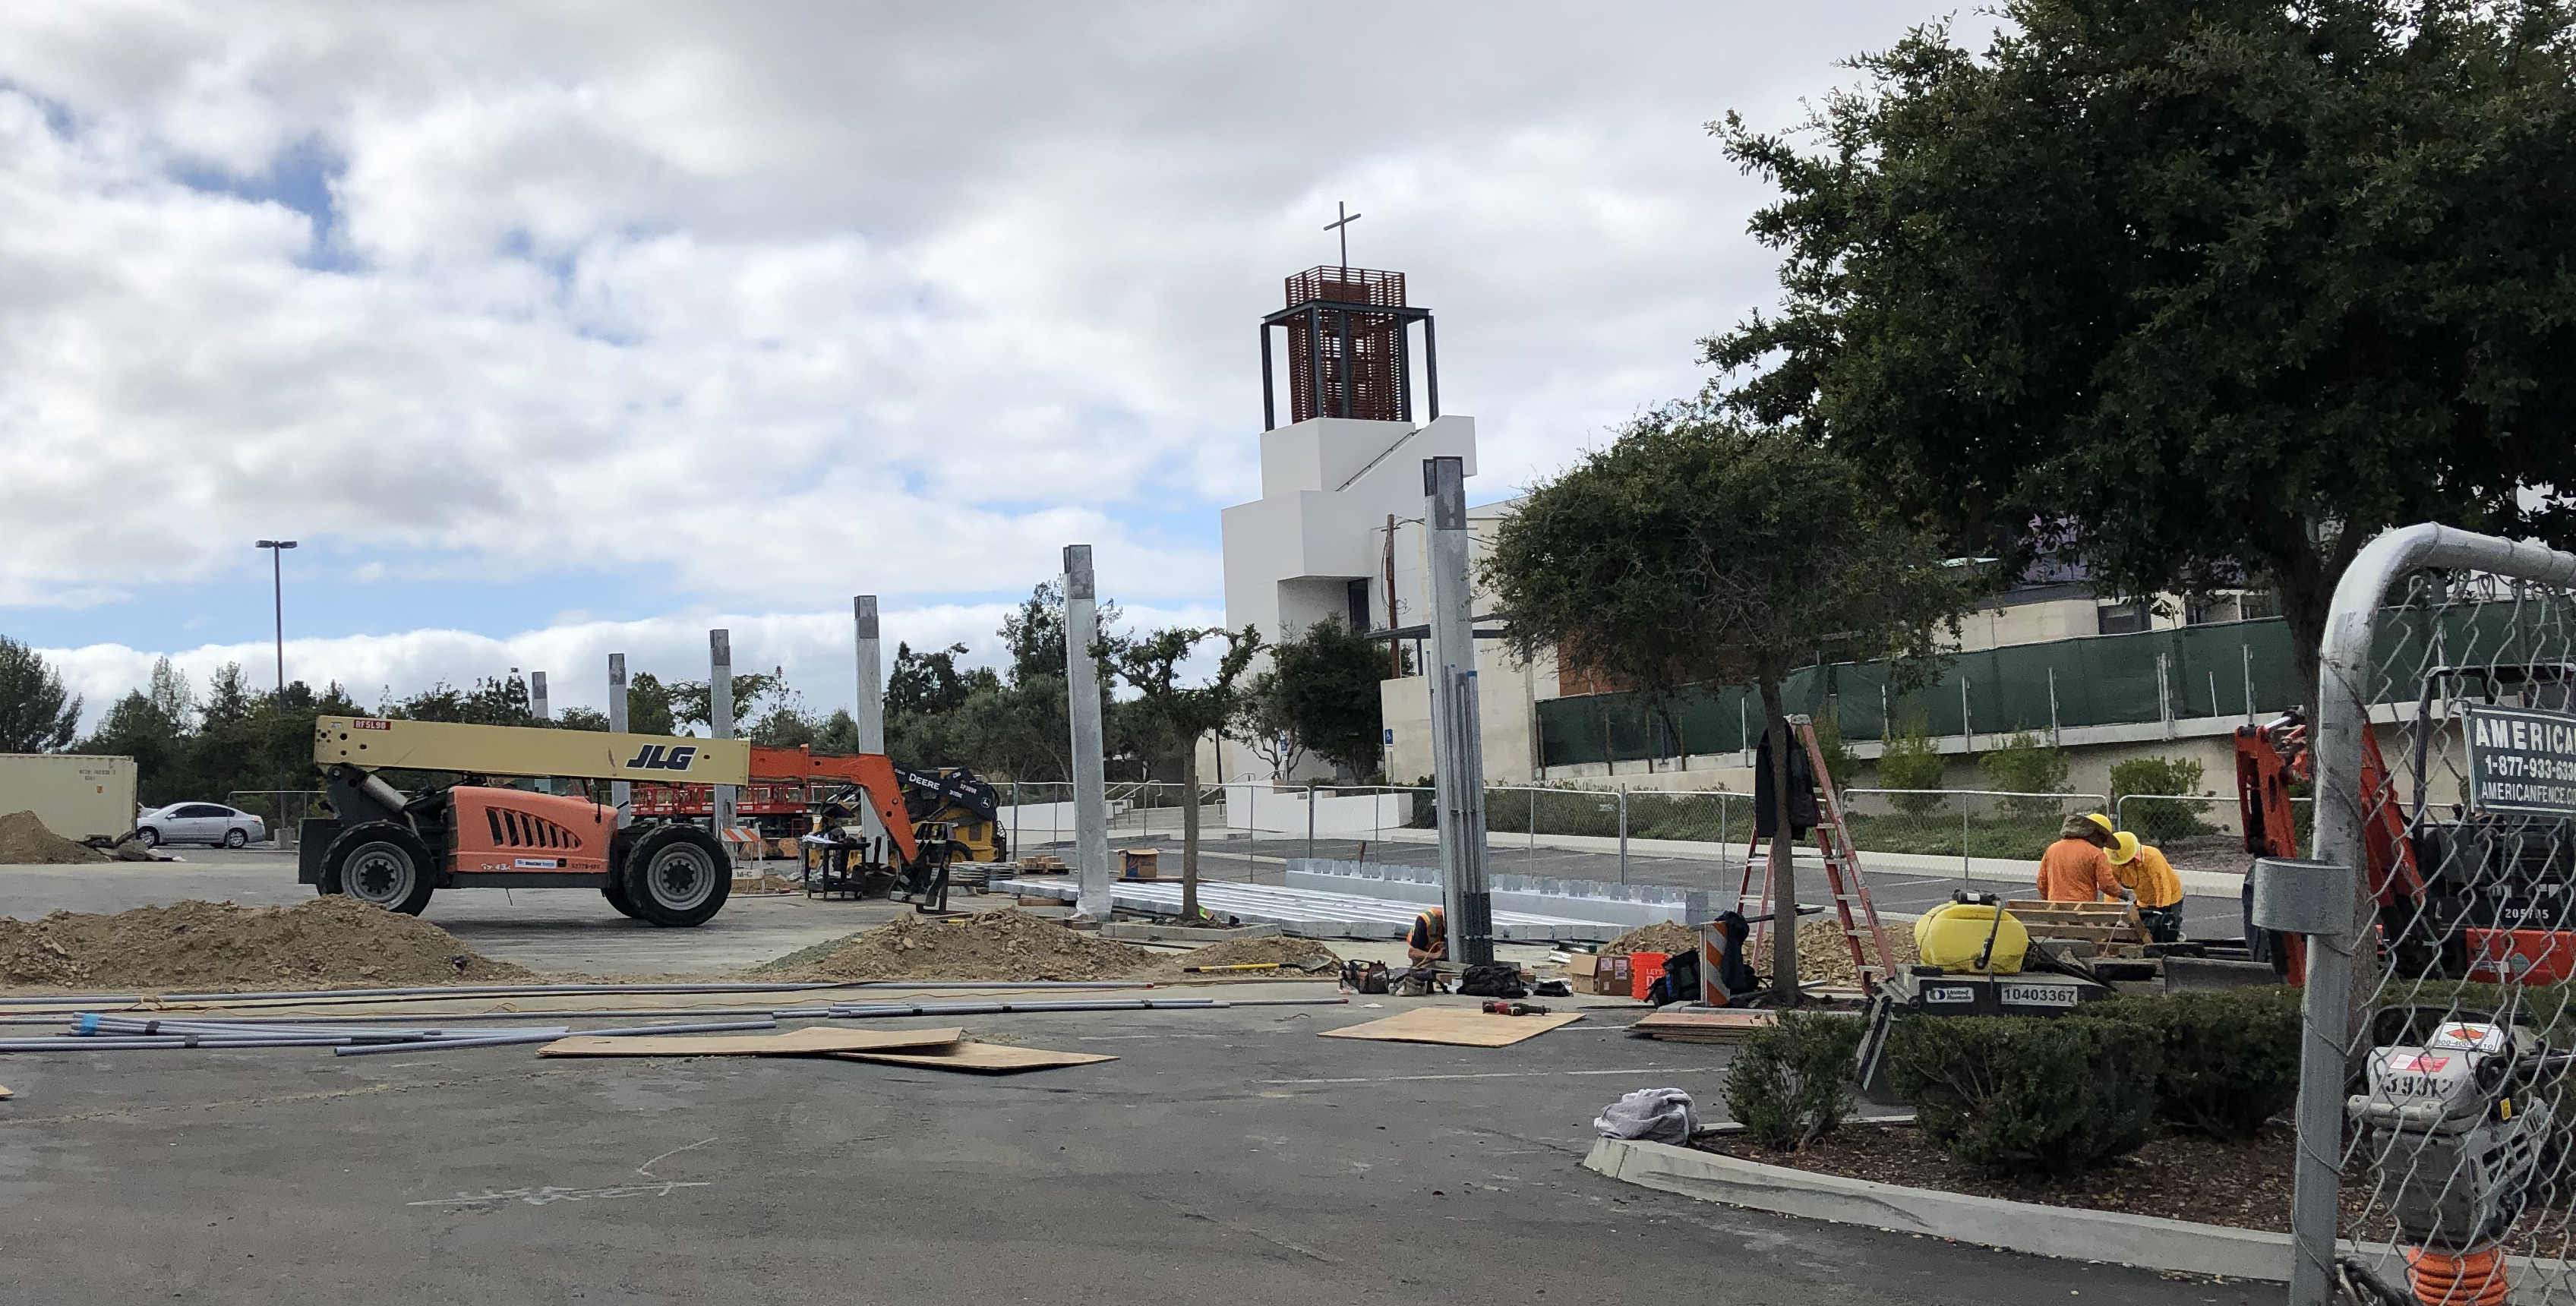 Solar Project Parking Update for the First Weekend of December